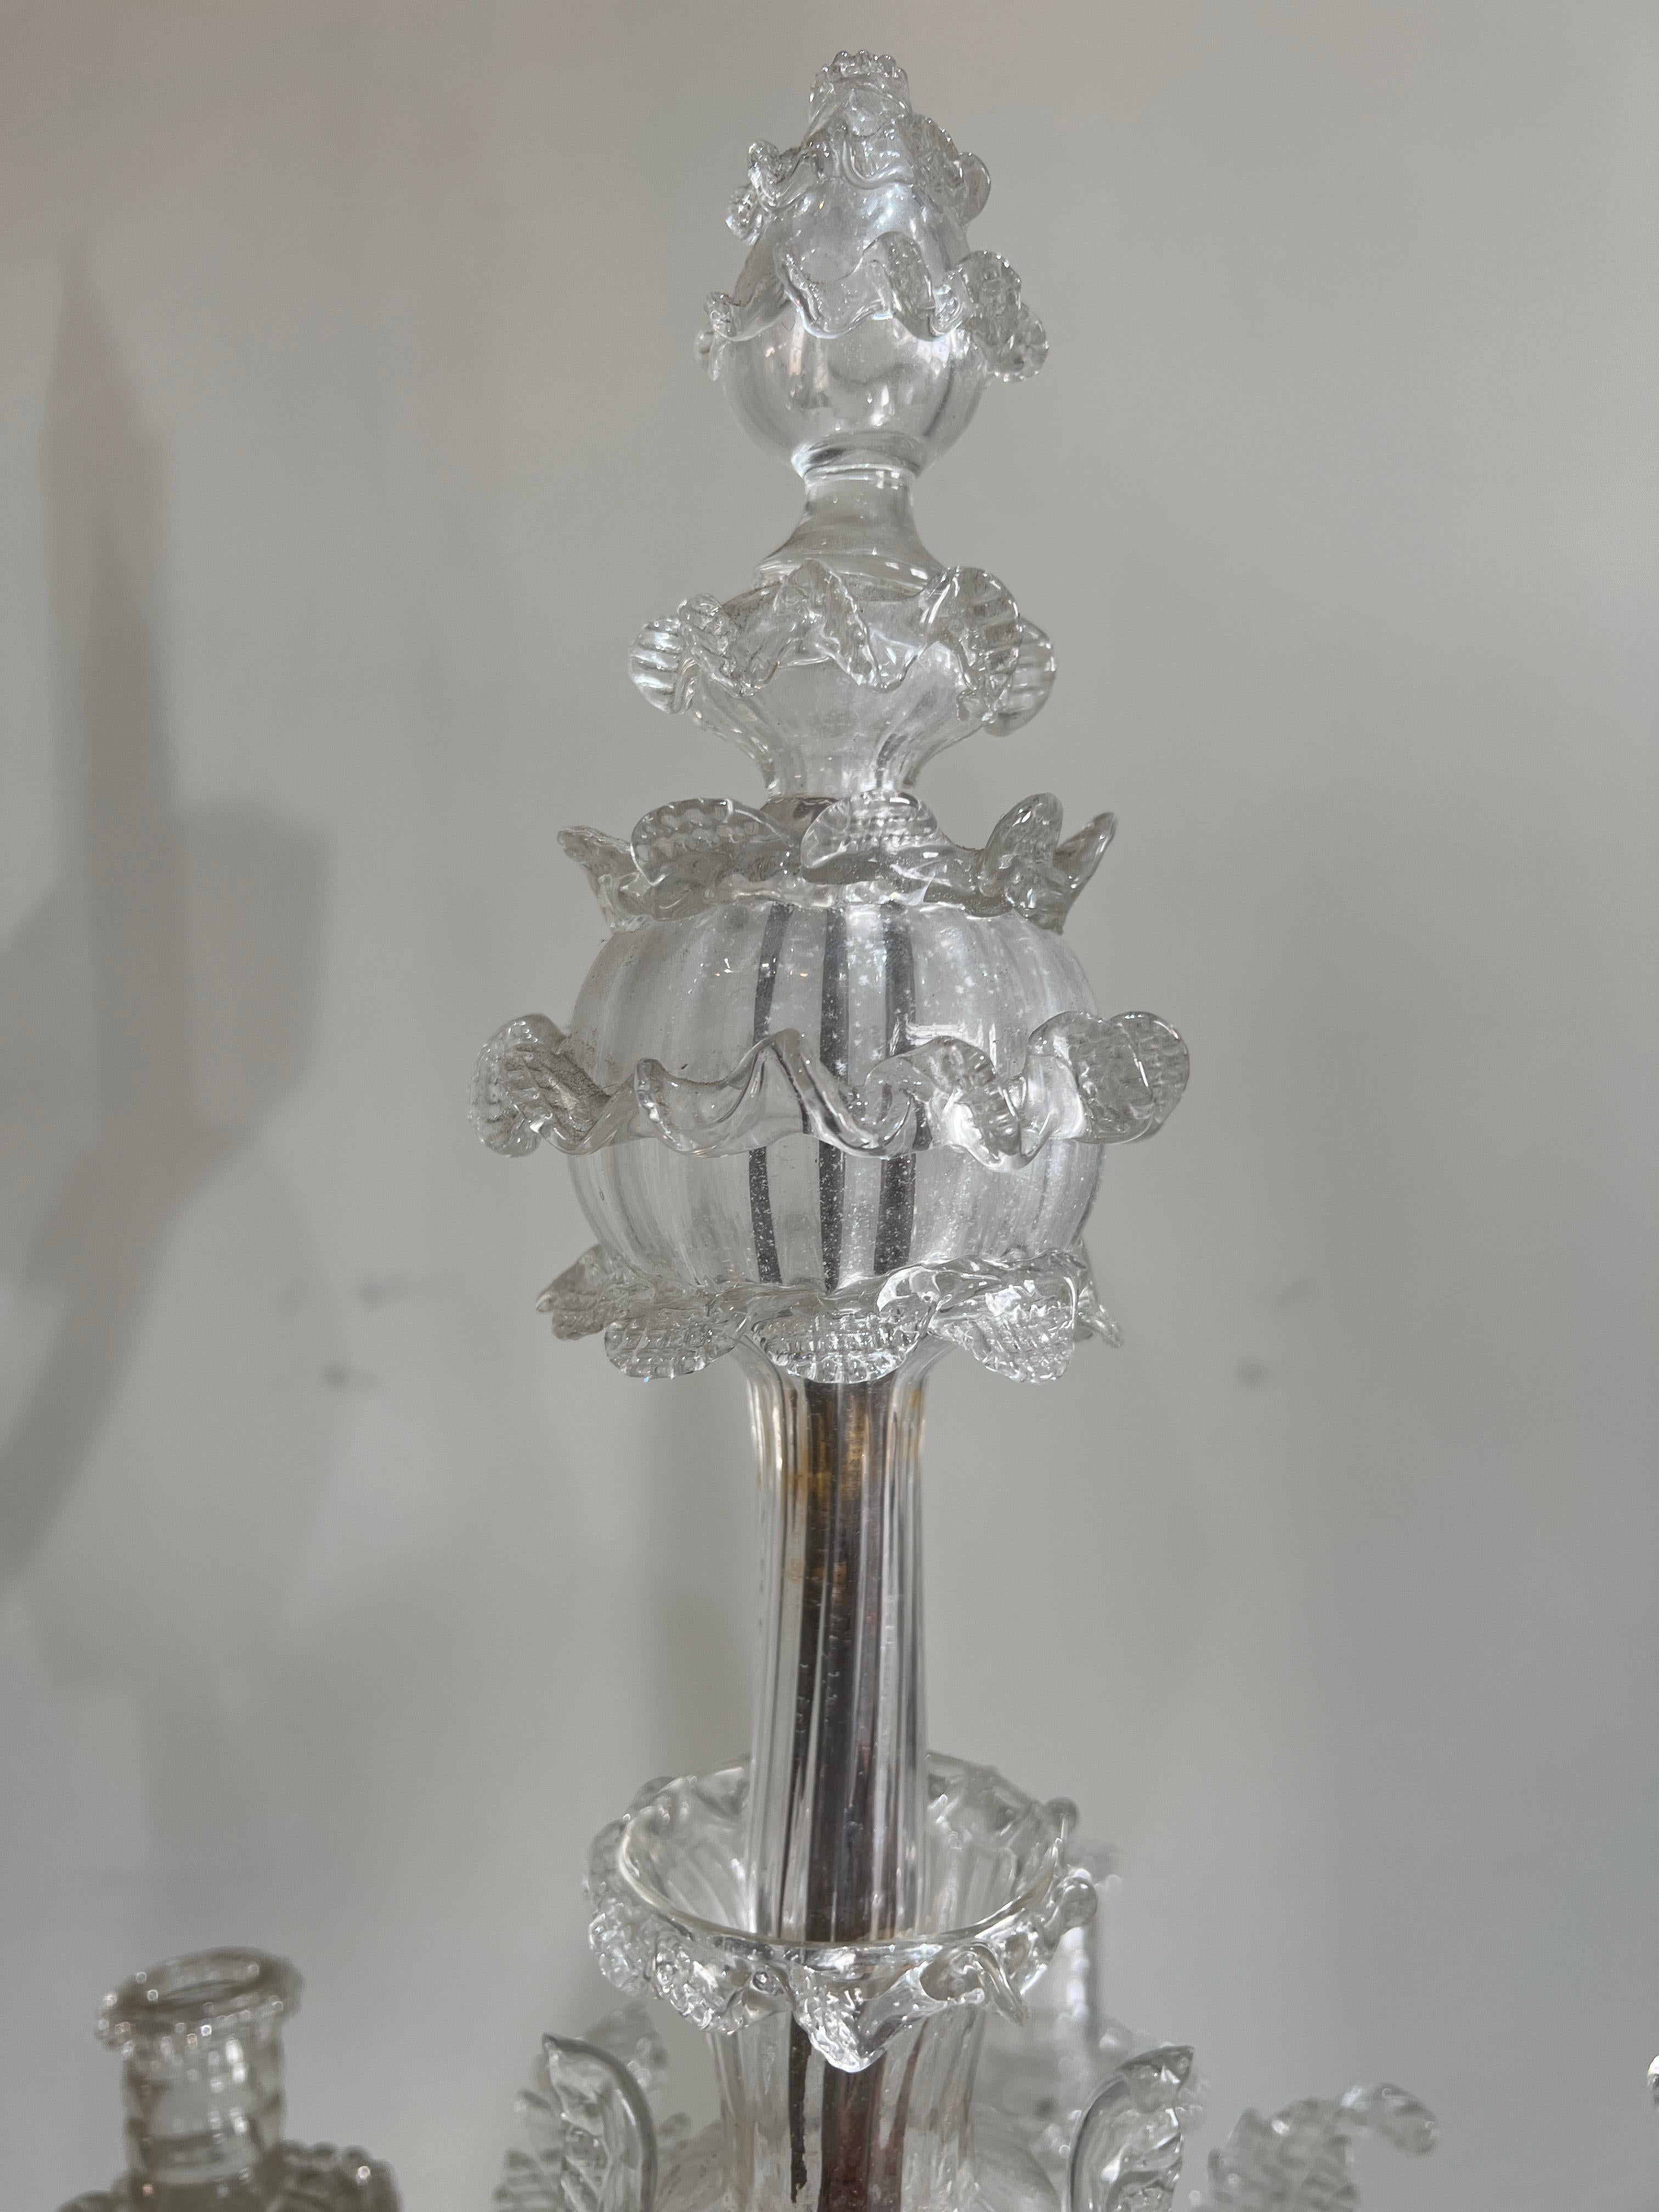 Pair of clear glass candelabras made in murano circa 1900.
2